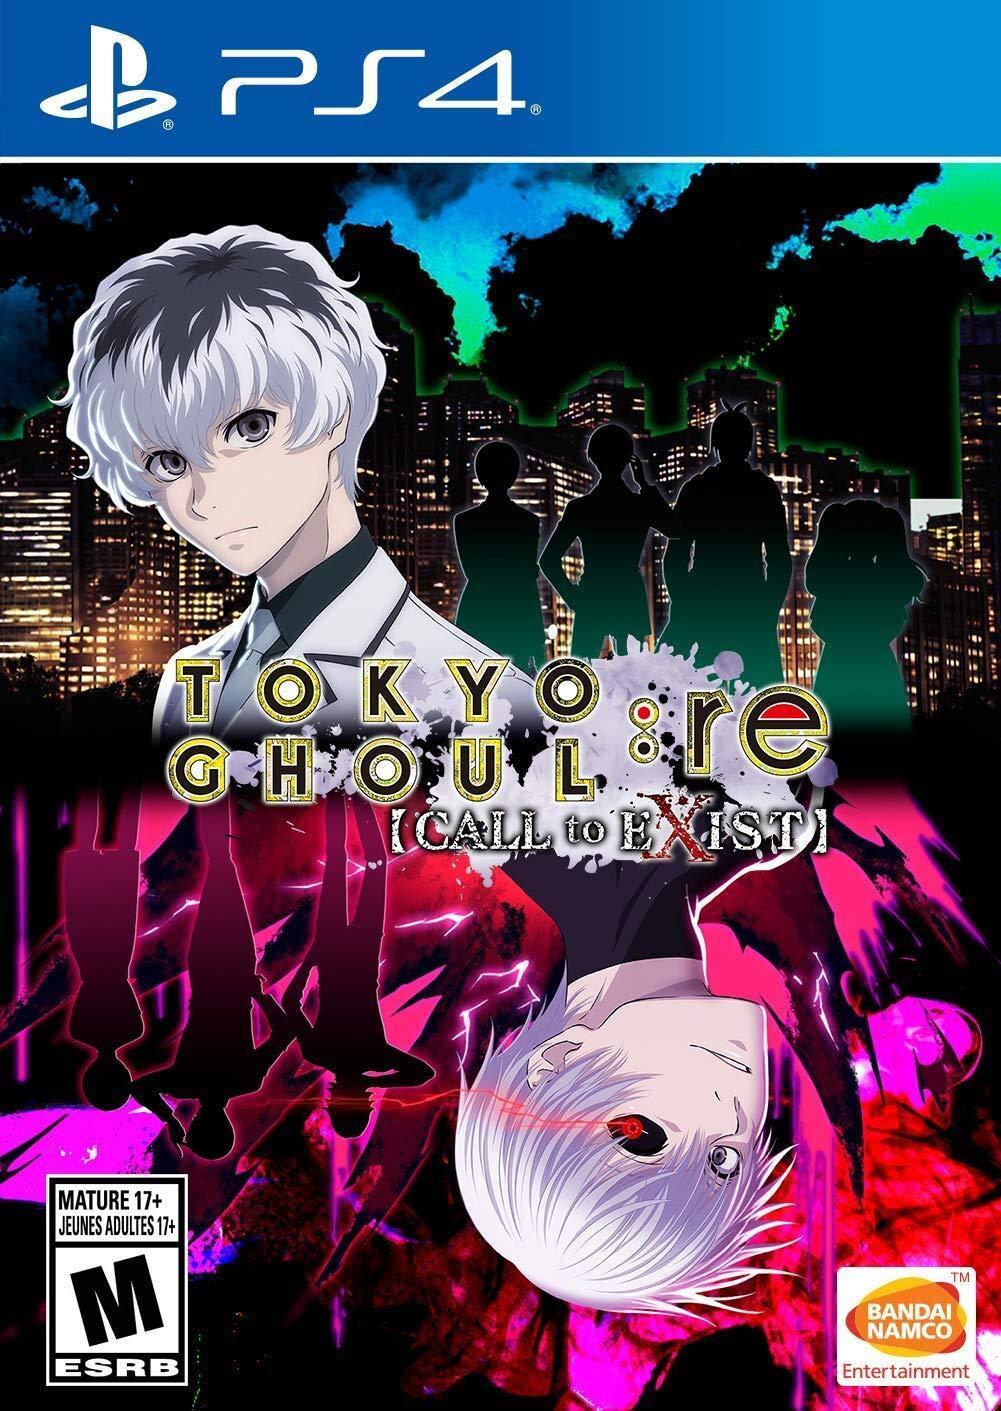 TOKYO GHOUL:re Call to Exist 4: Bandai